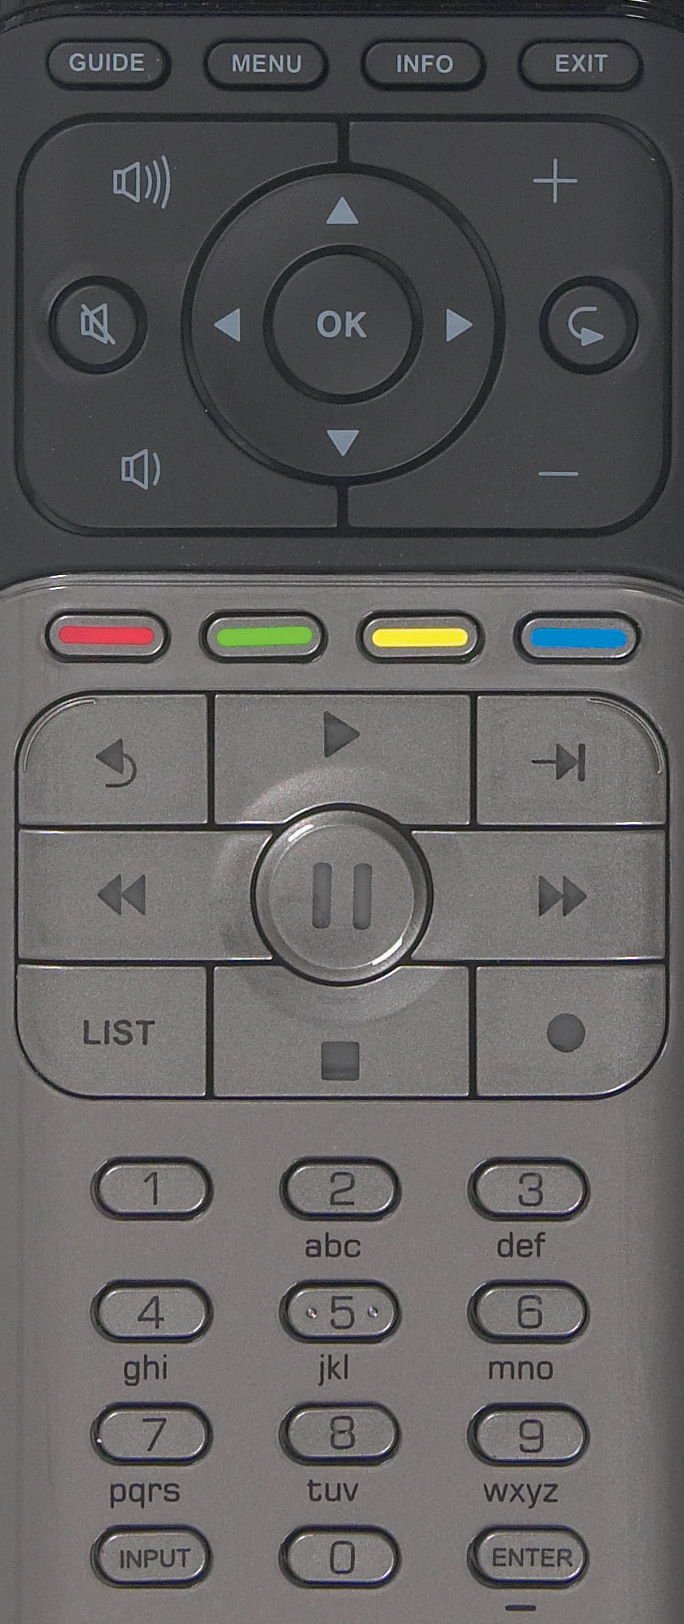 Remote control pointing at a TV_restart button